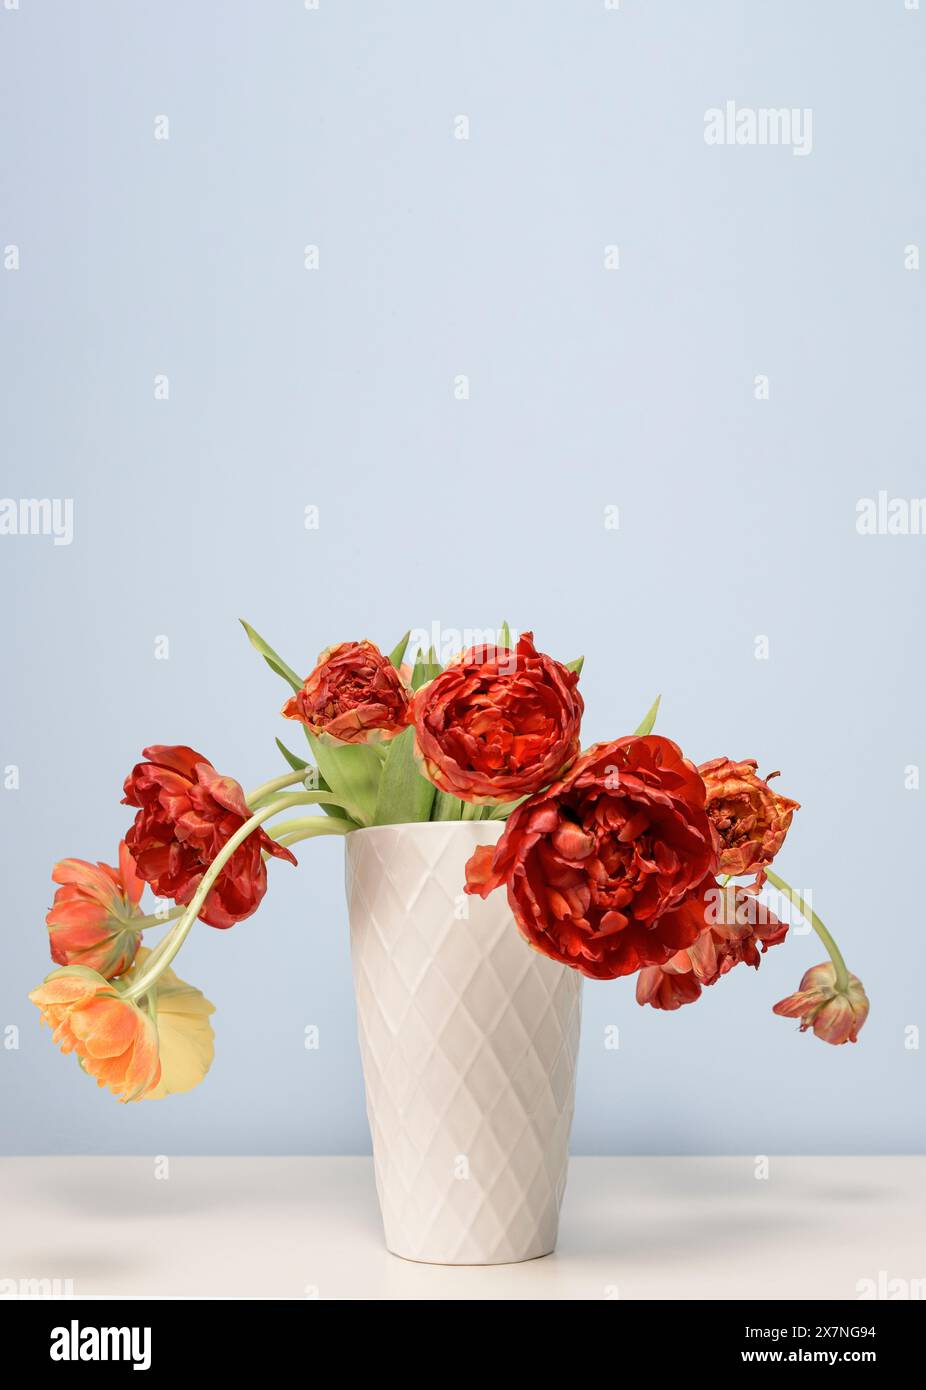 Yellow and red peonies in a white ceramic vase on a light blue background. Stock Photo